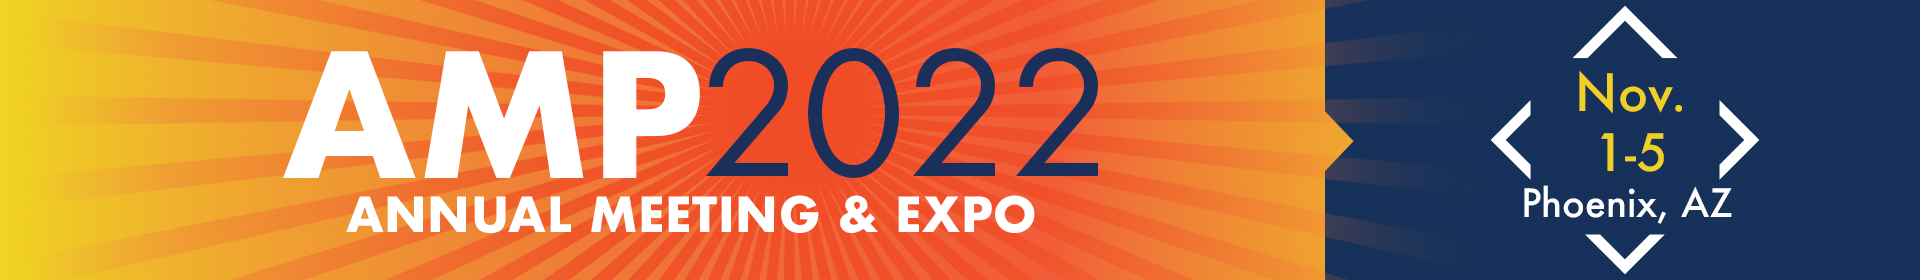 AMP 2022 - Call for Topics Event Banner